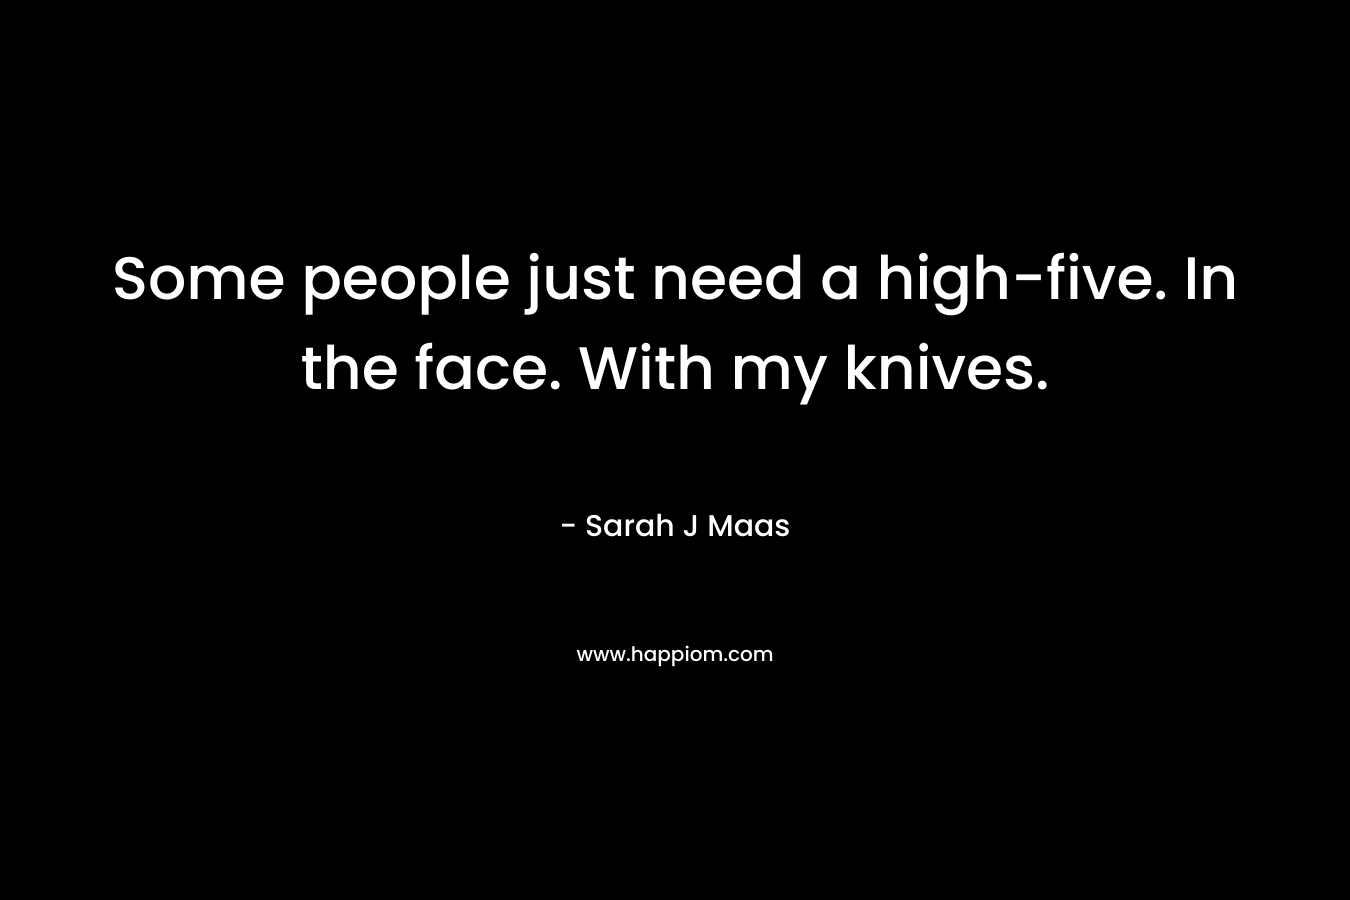 Some people just need a high-five. In the face. With my knives.